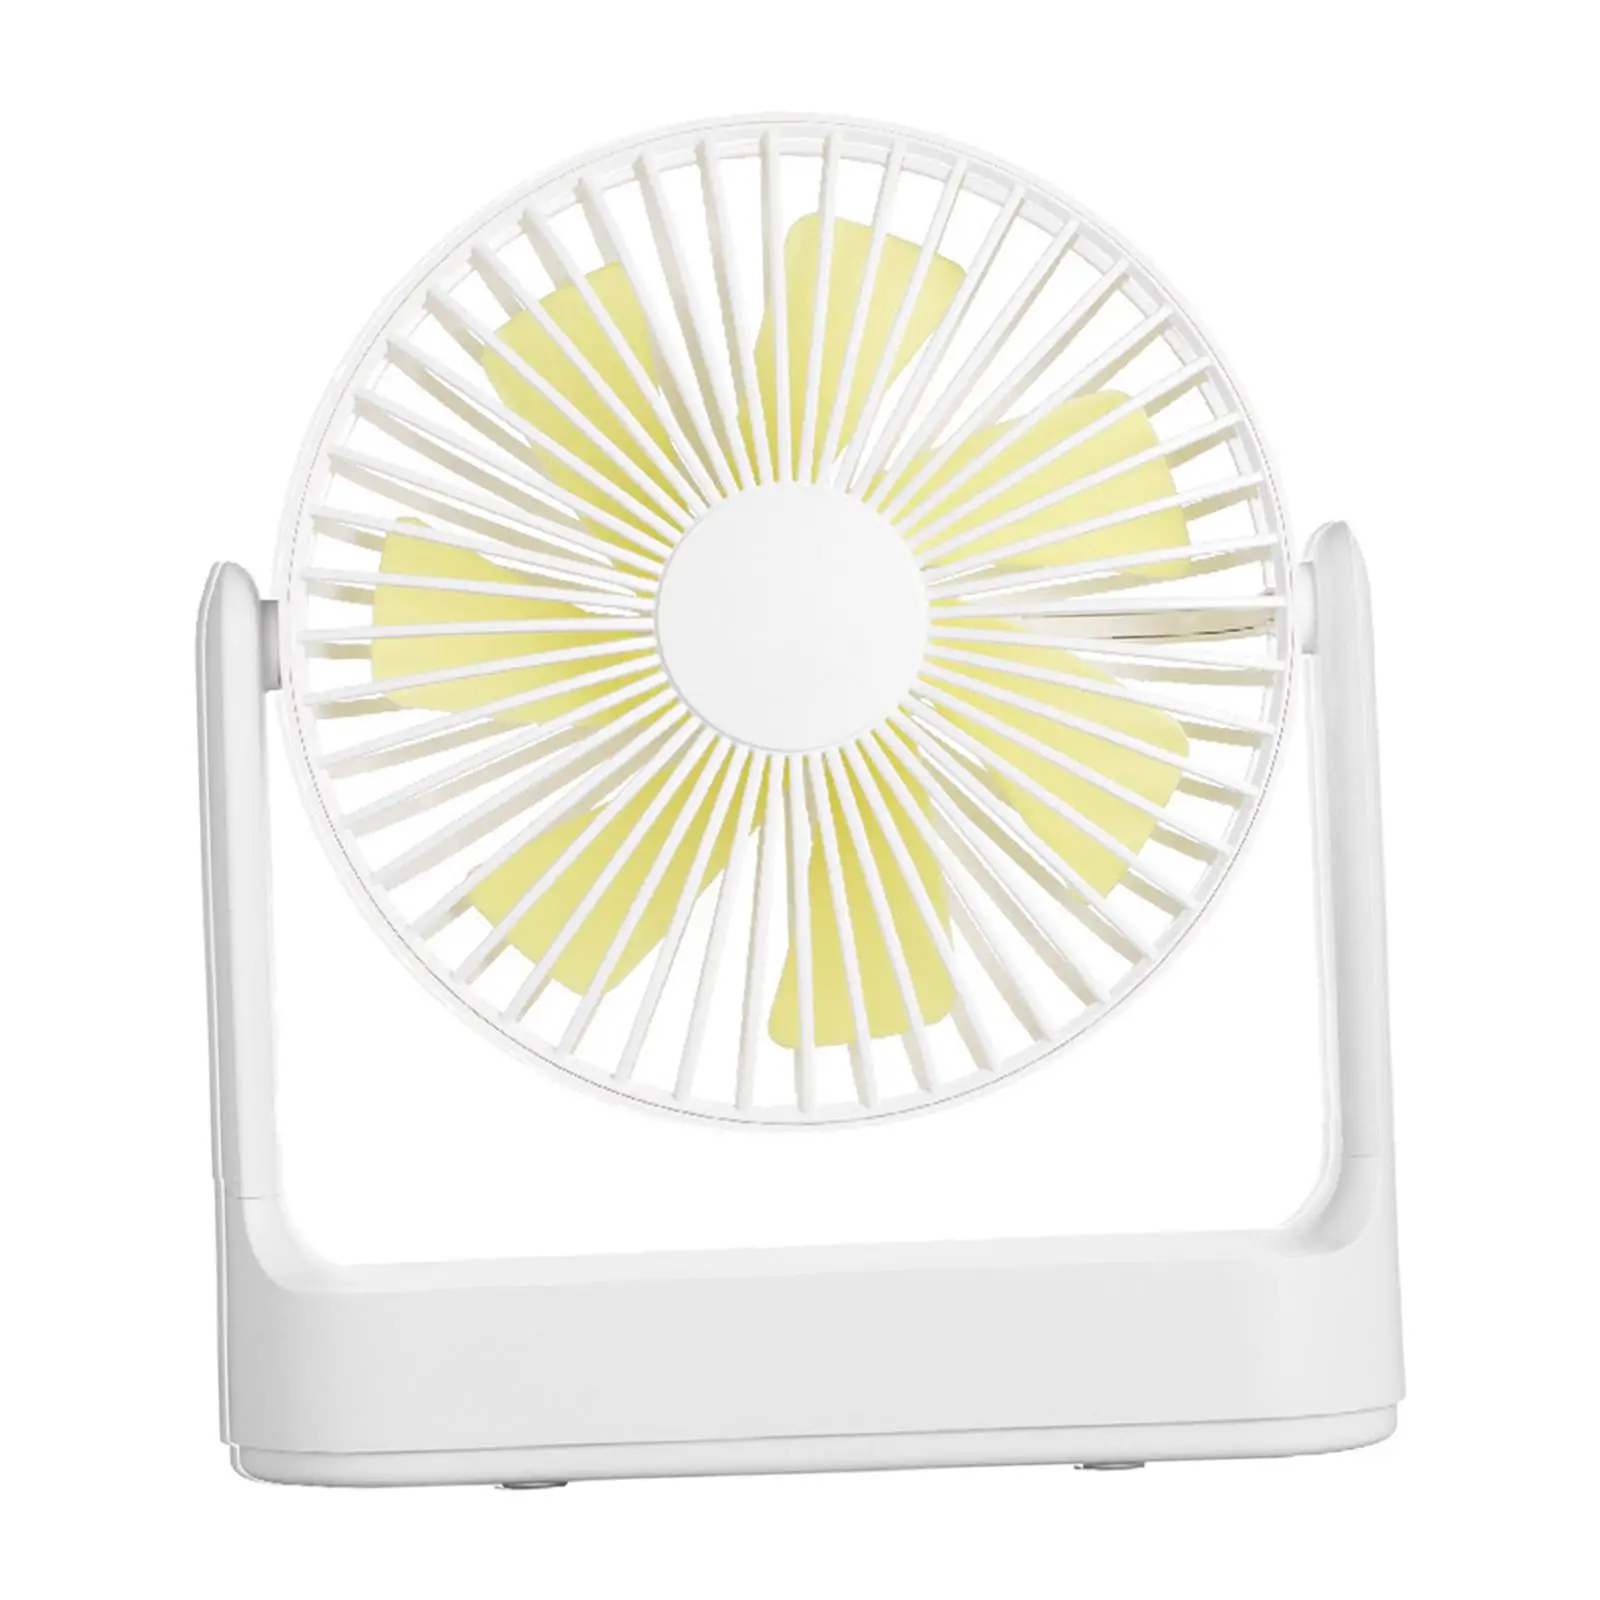 Personal Portable Fan USB Power Hanging White Electrical Fan Adjustment Air Cooler for Outdoor Backpacking Indoor Car Emergency